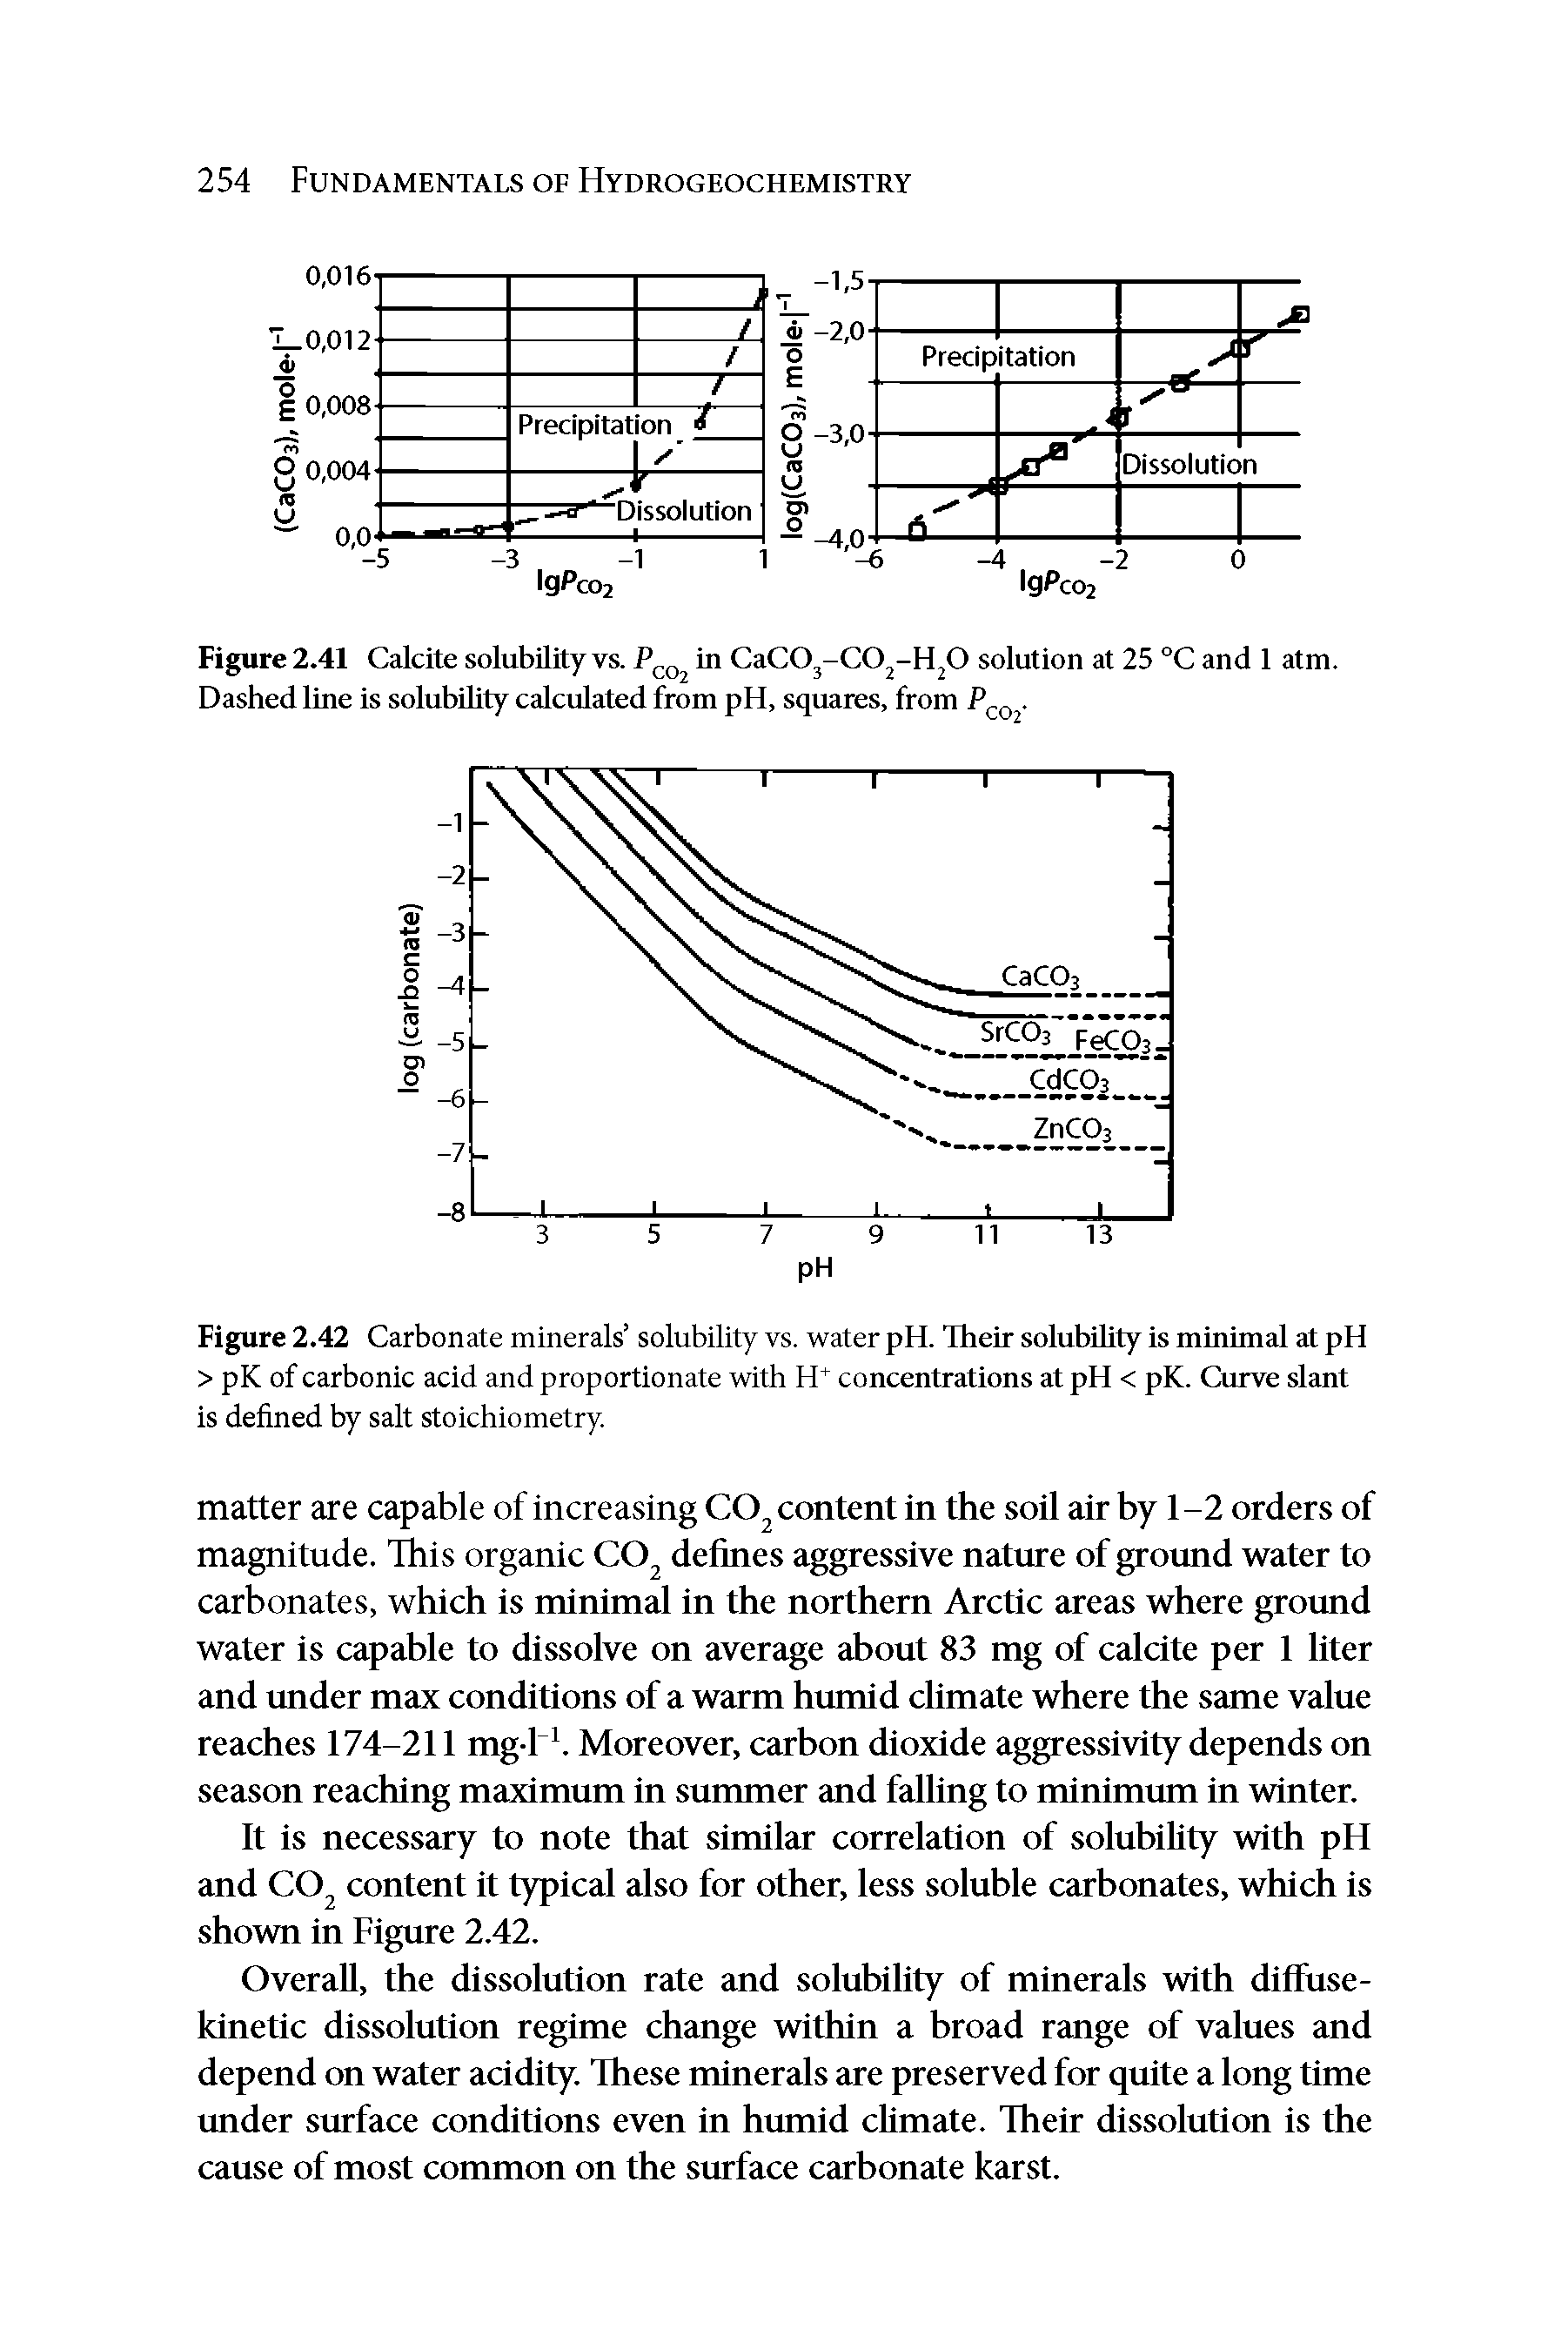 Figure 2.42 Carbonate minerals solubility vs. water pH. Their solubility is minimal at pH > pK of carbonic acid and proportionate with H+ concentrations at pH < pK. Curve slant is defined by salt stoichiometry.